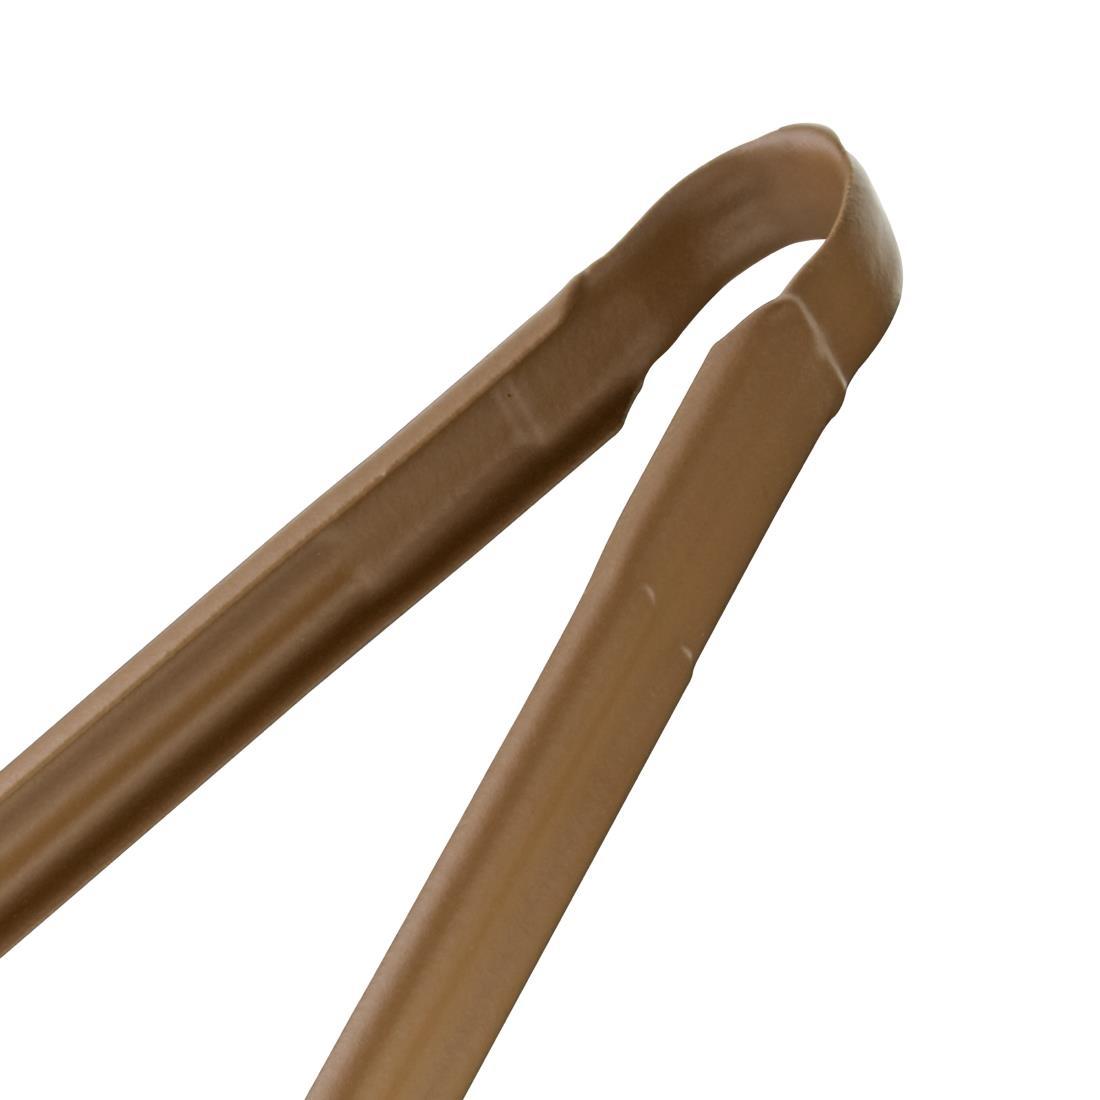 Hygiplas Colour Coded Serving Tong Brown 405mm - HC850  - 4